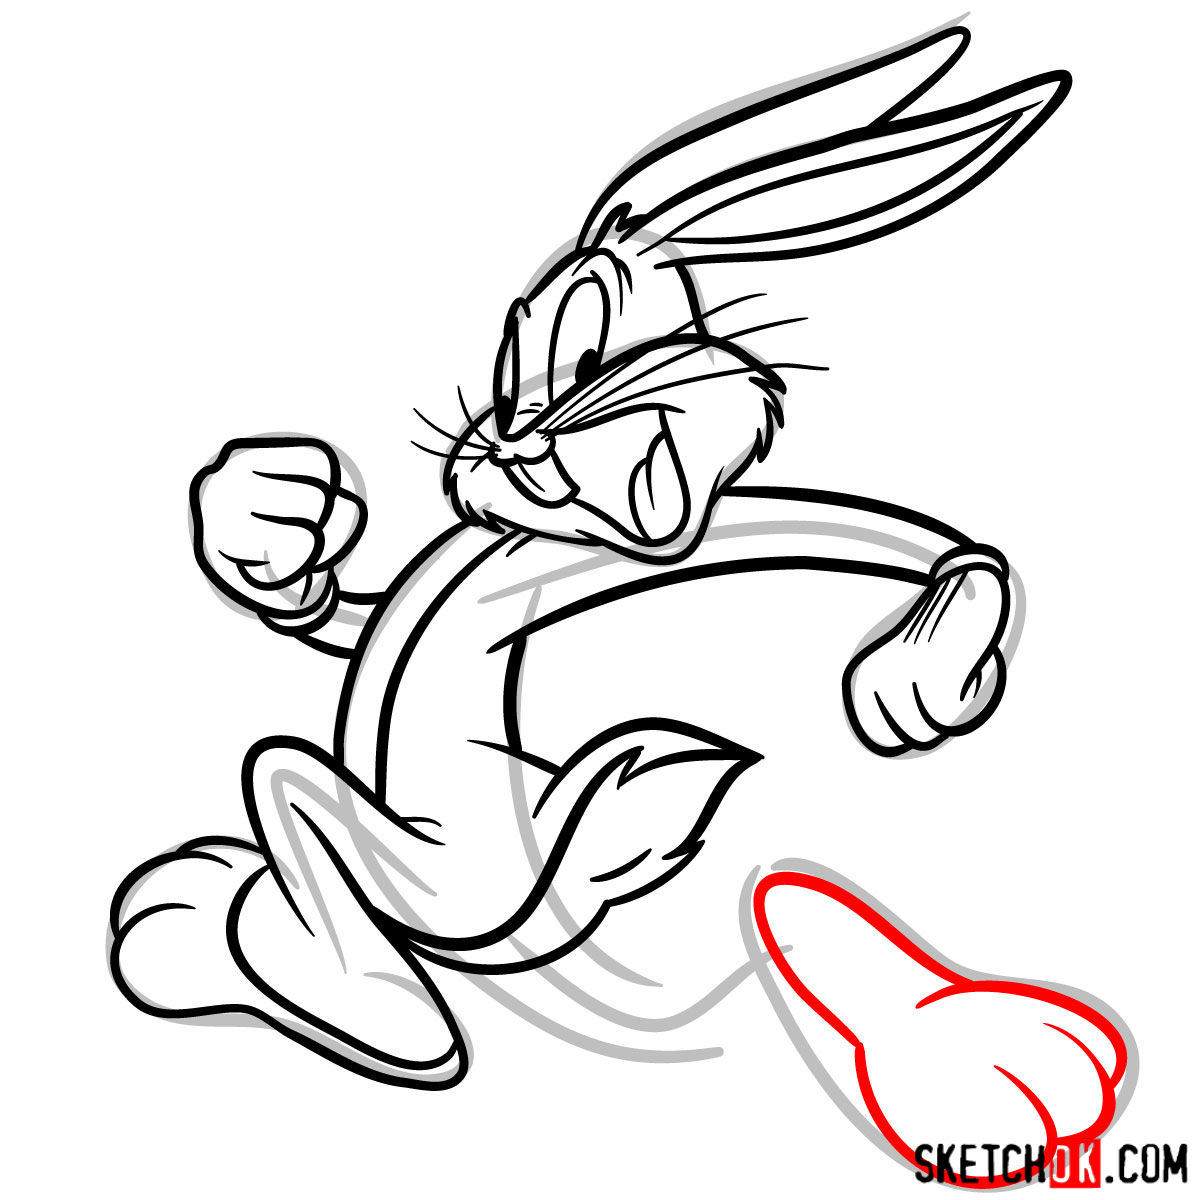 How to draw Bugs Bunny running - step 11